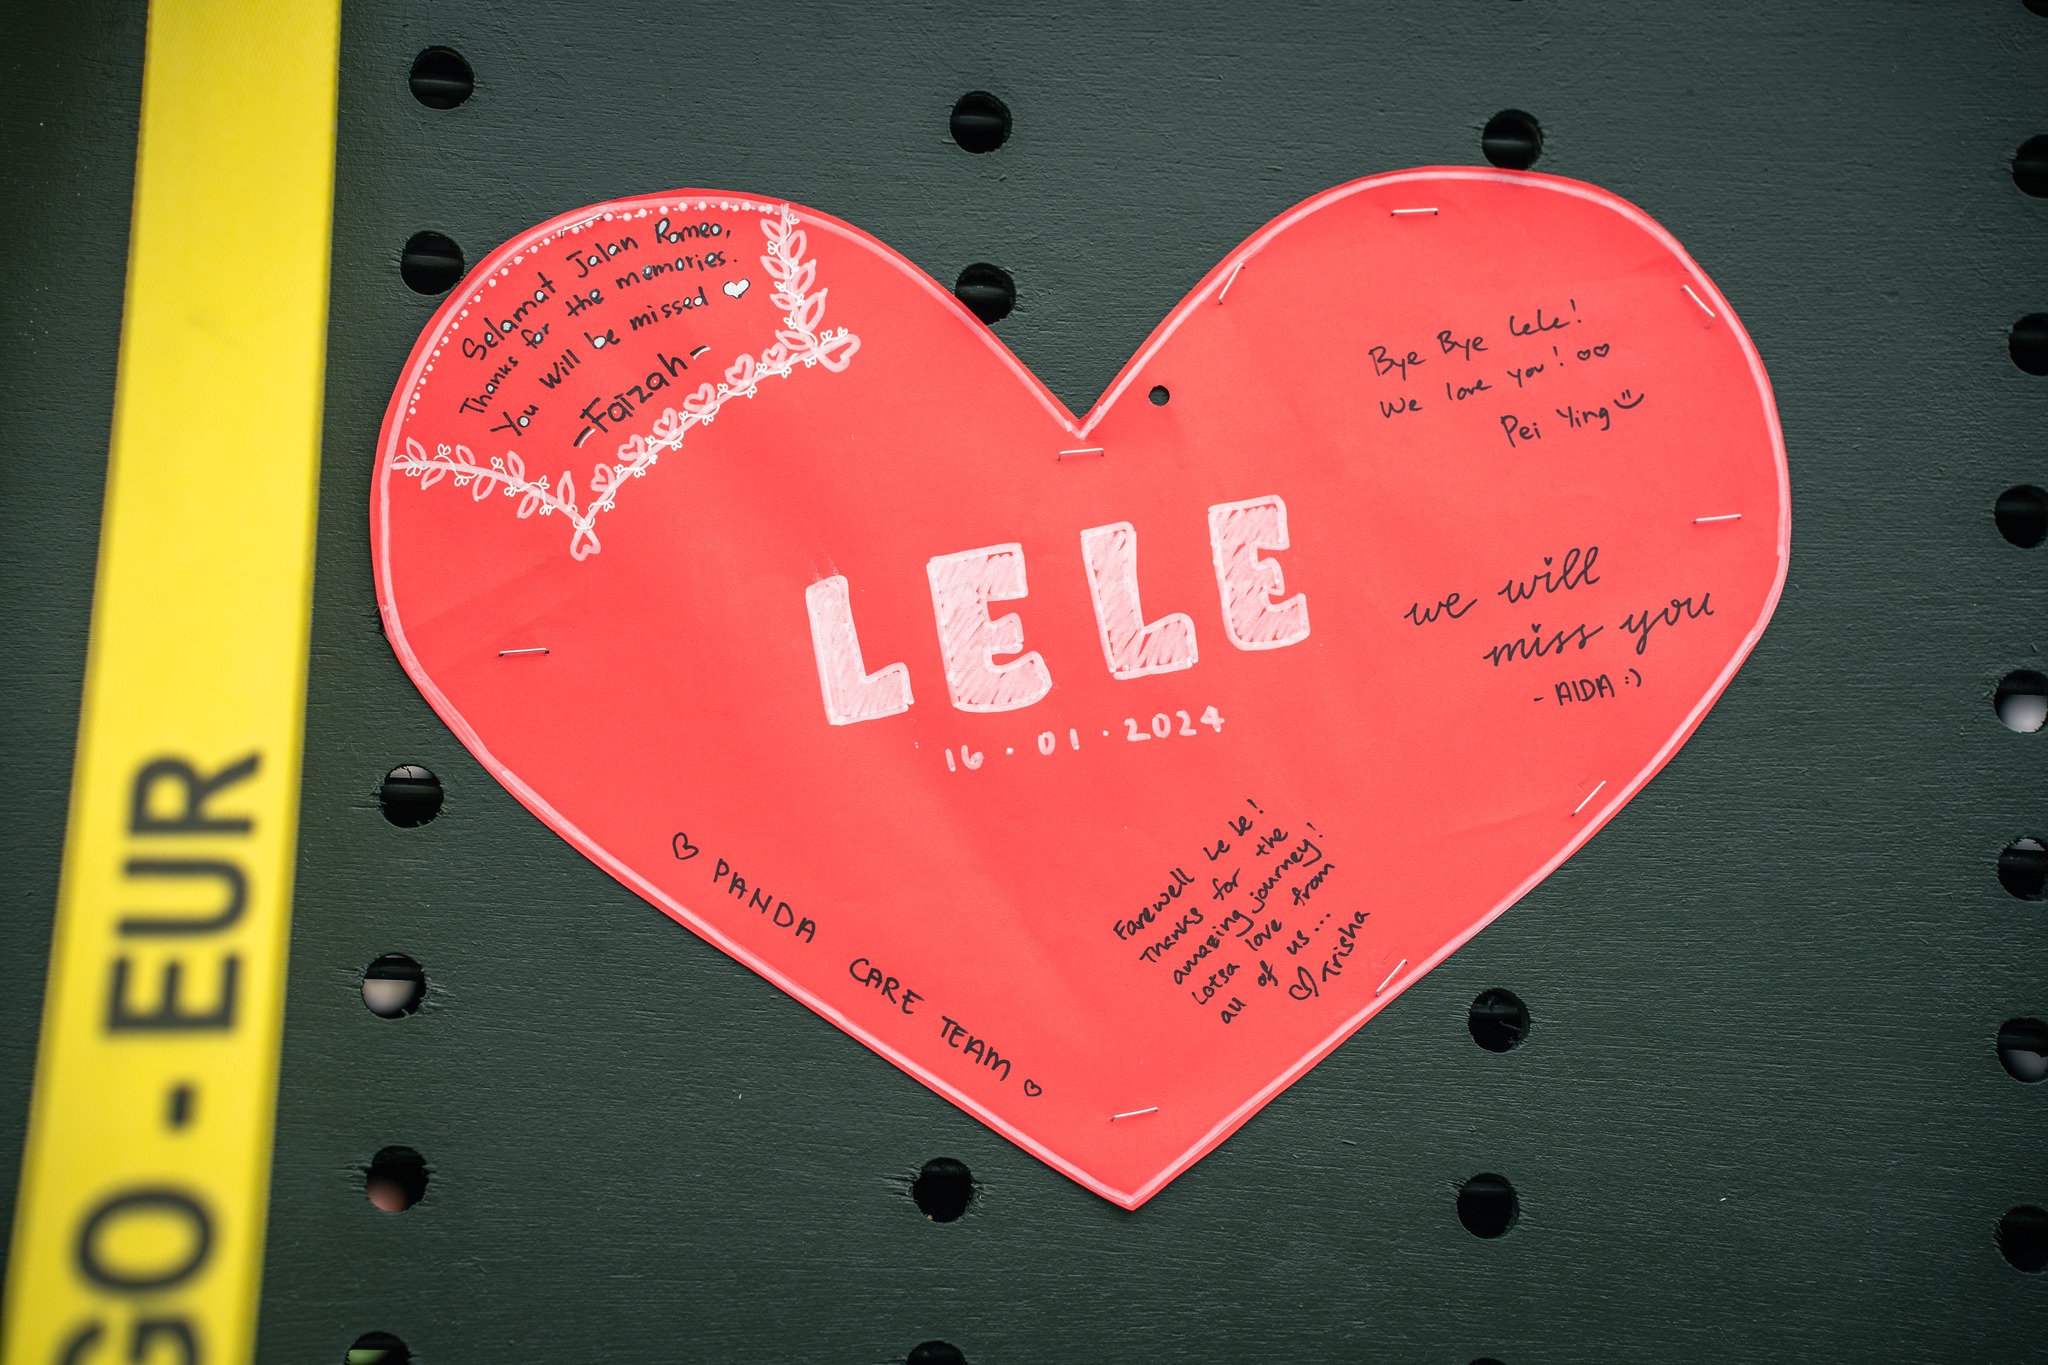 A love-heart-shaped piece of cardboard with endearing messages to Le Le from his keepers.